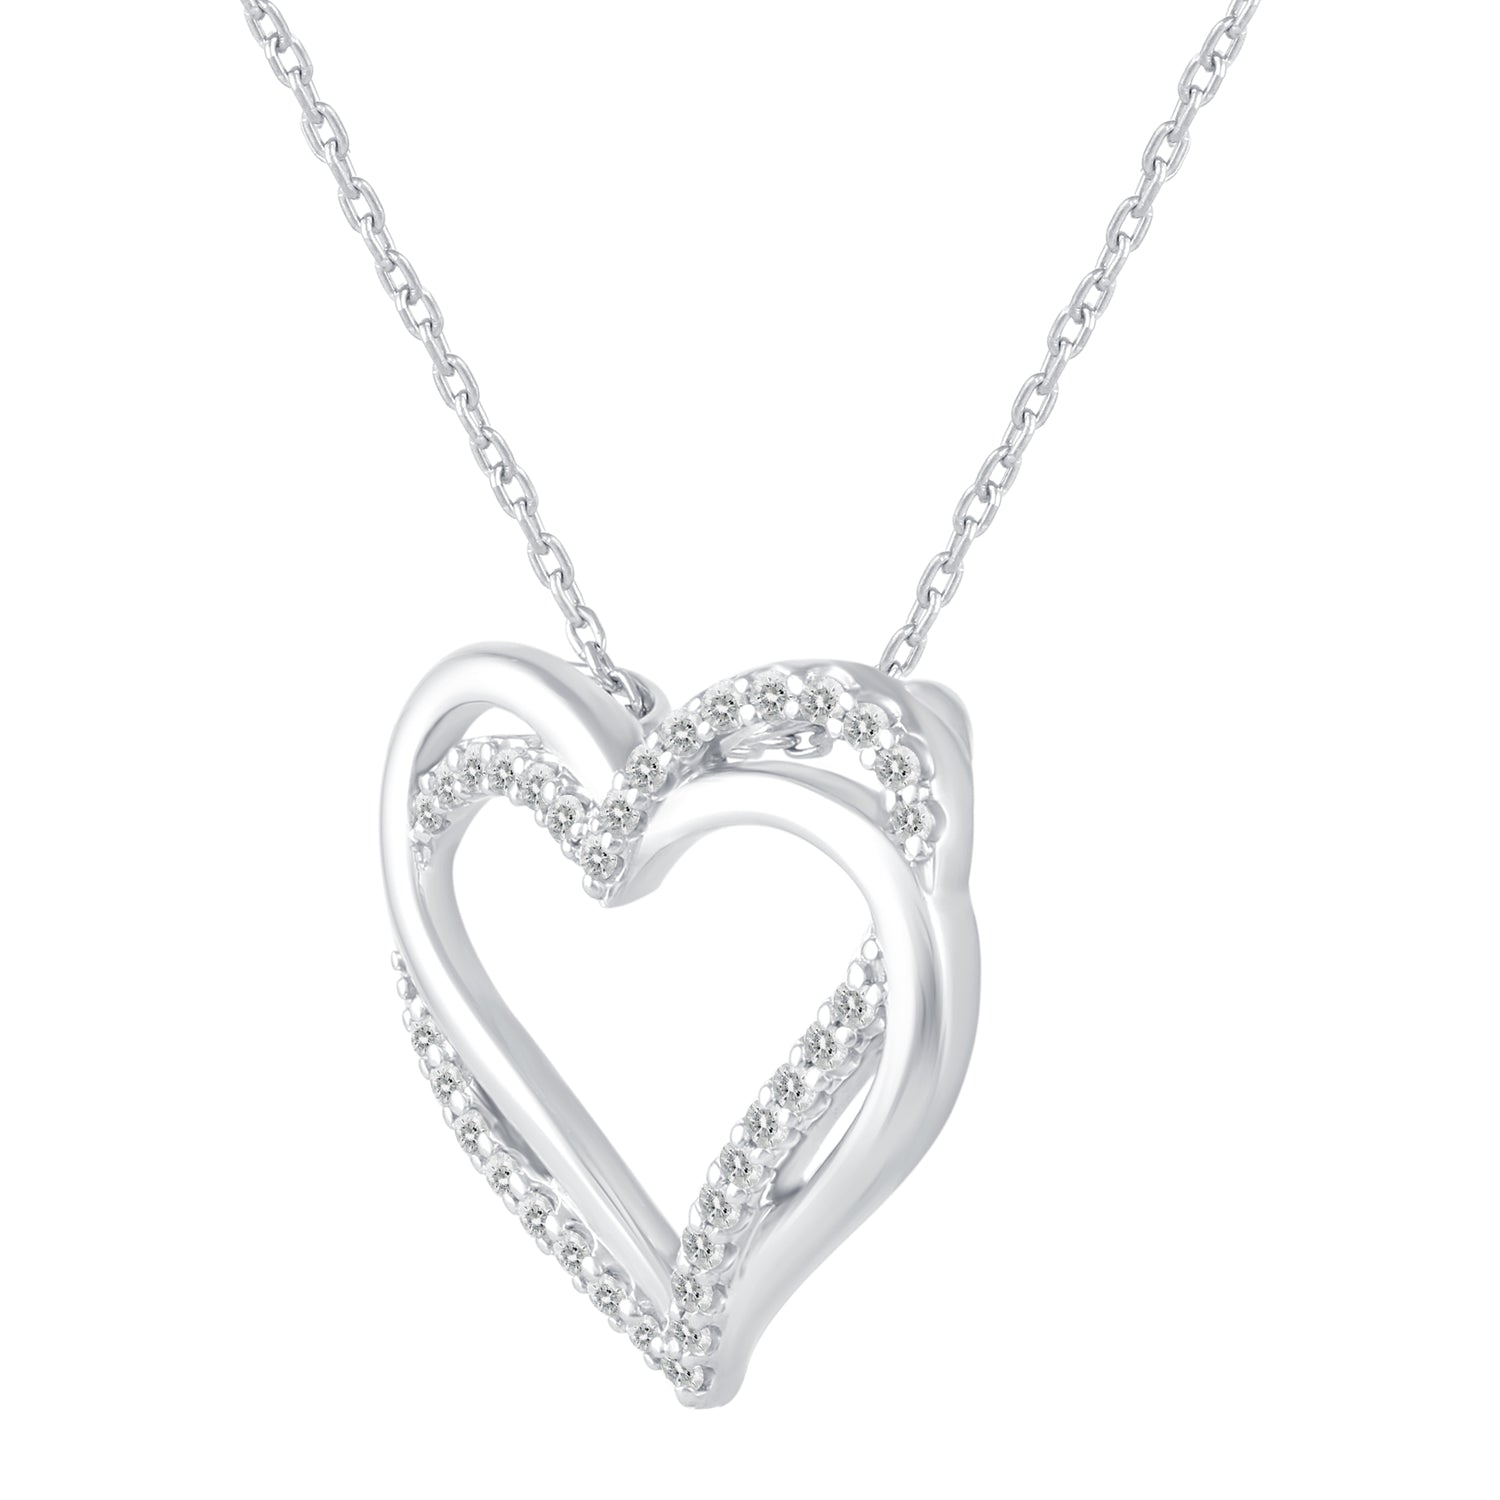 1/4 Cttw Diamond Double Heart Entwined Pendant Necklace set in 925 Sterling Silver